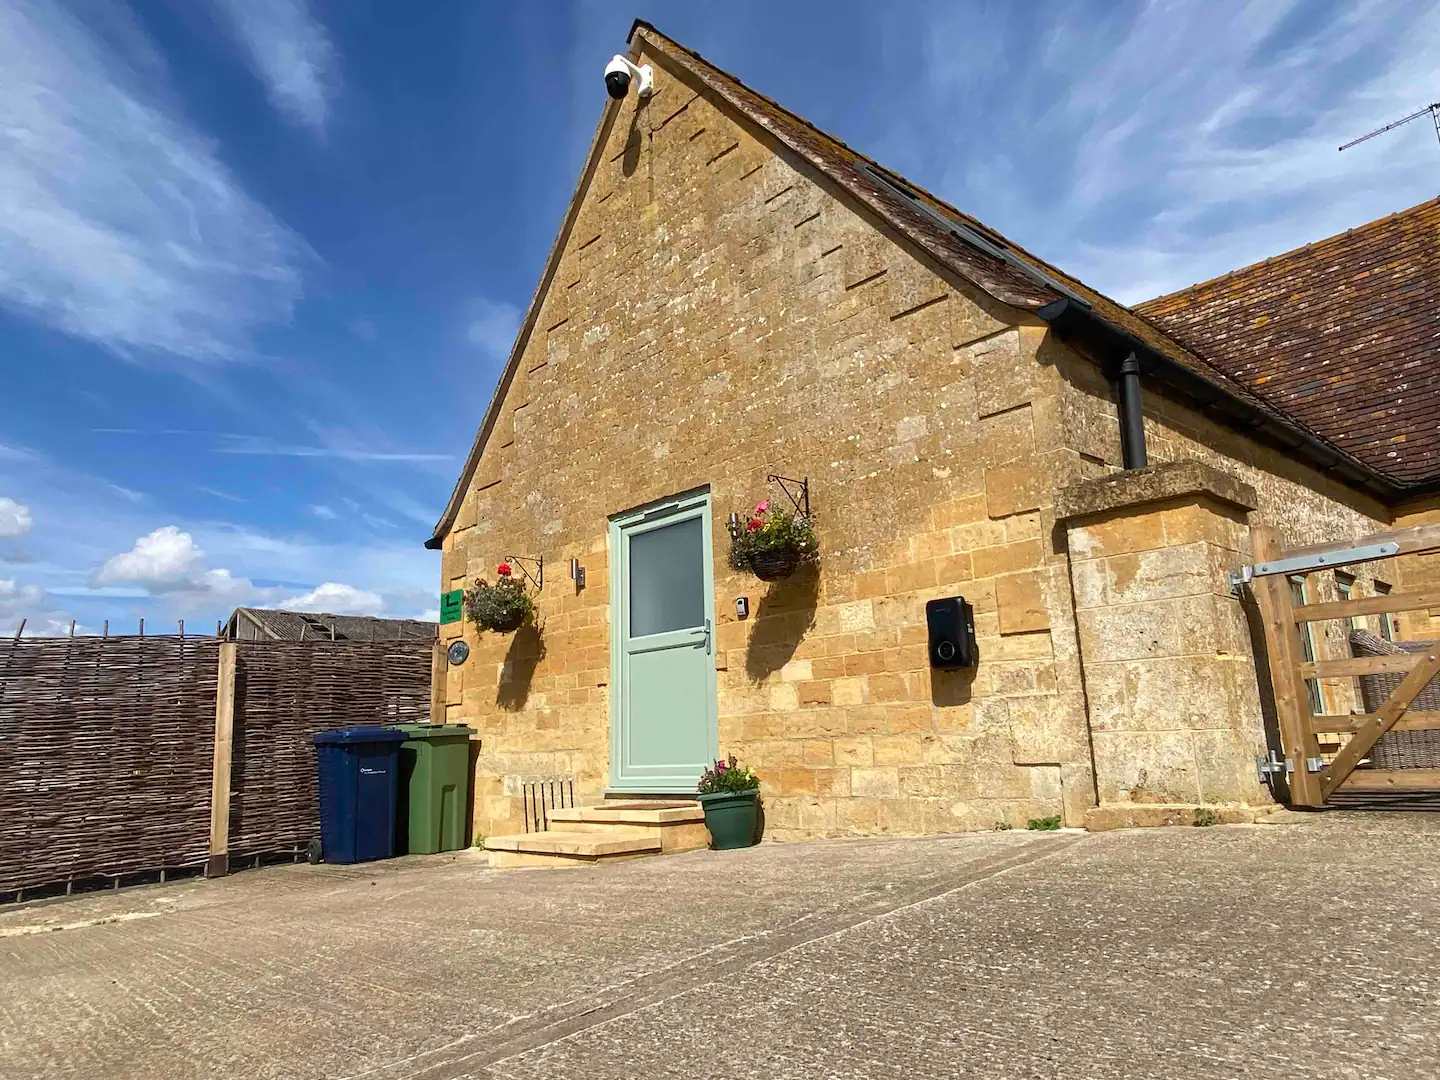 The Stables at Raymeadow Farm, Toddinton, Gloucestershire